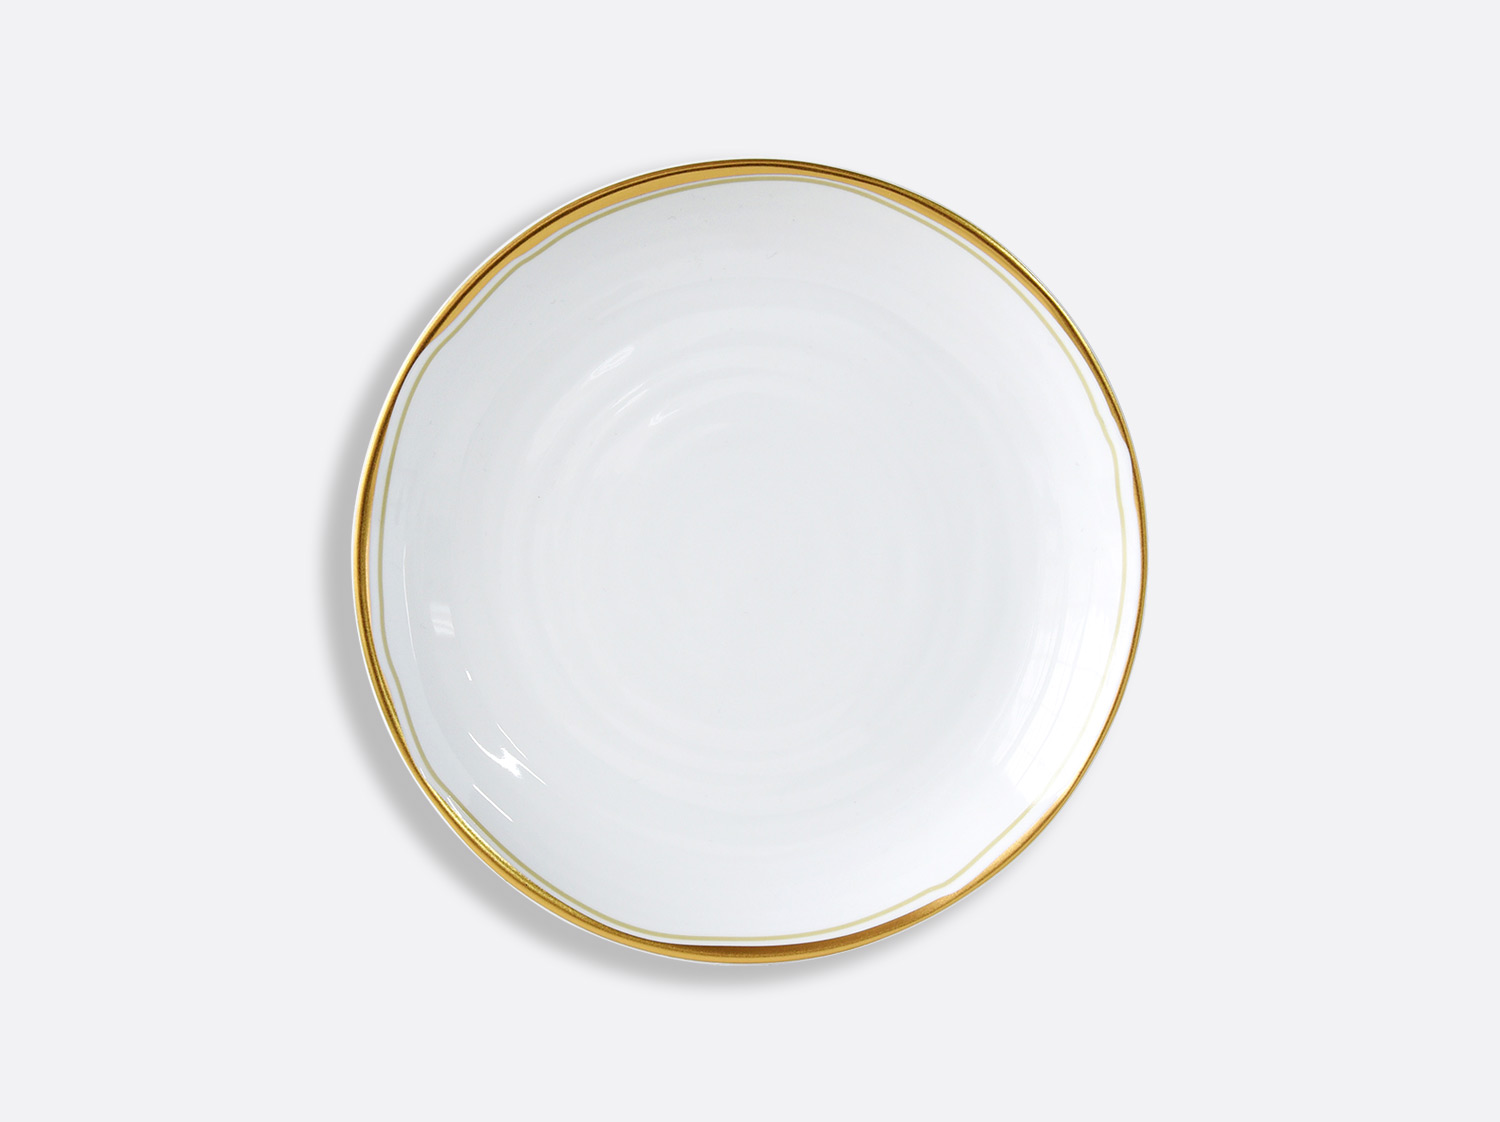 China Coupe plate 21.5 cm of the collection ALBÂTRE | Bernardaud